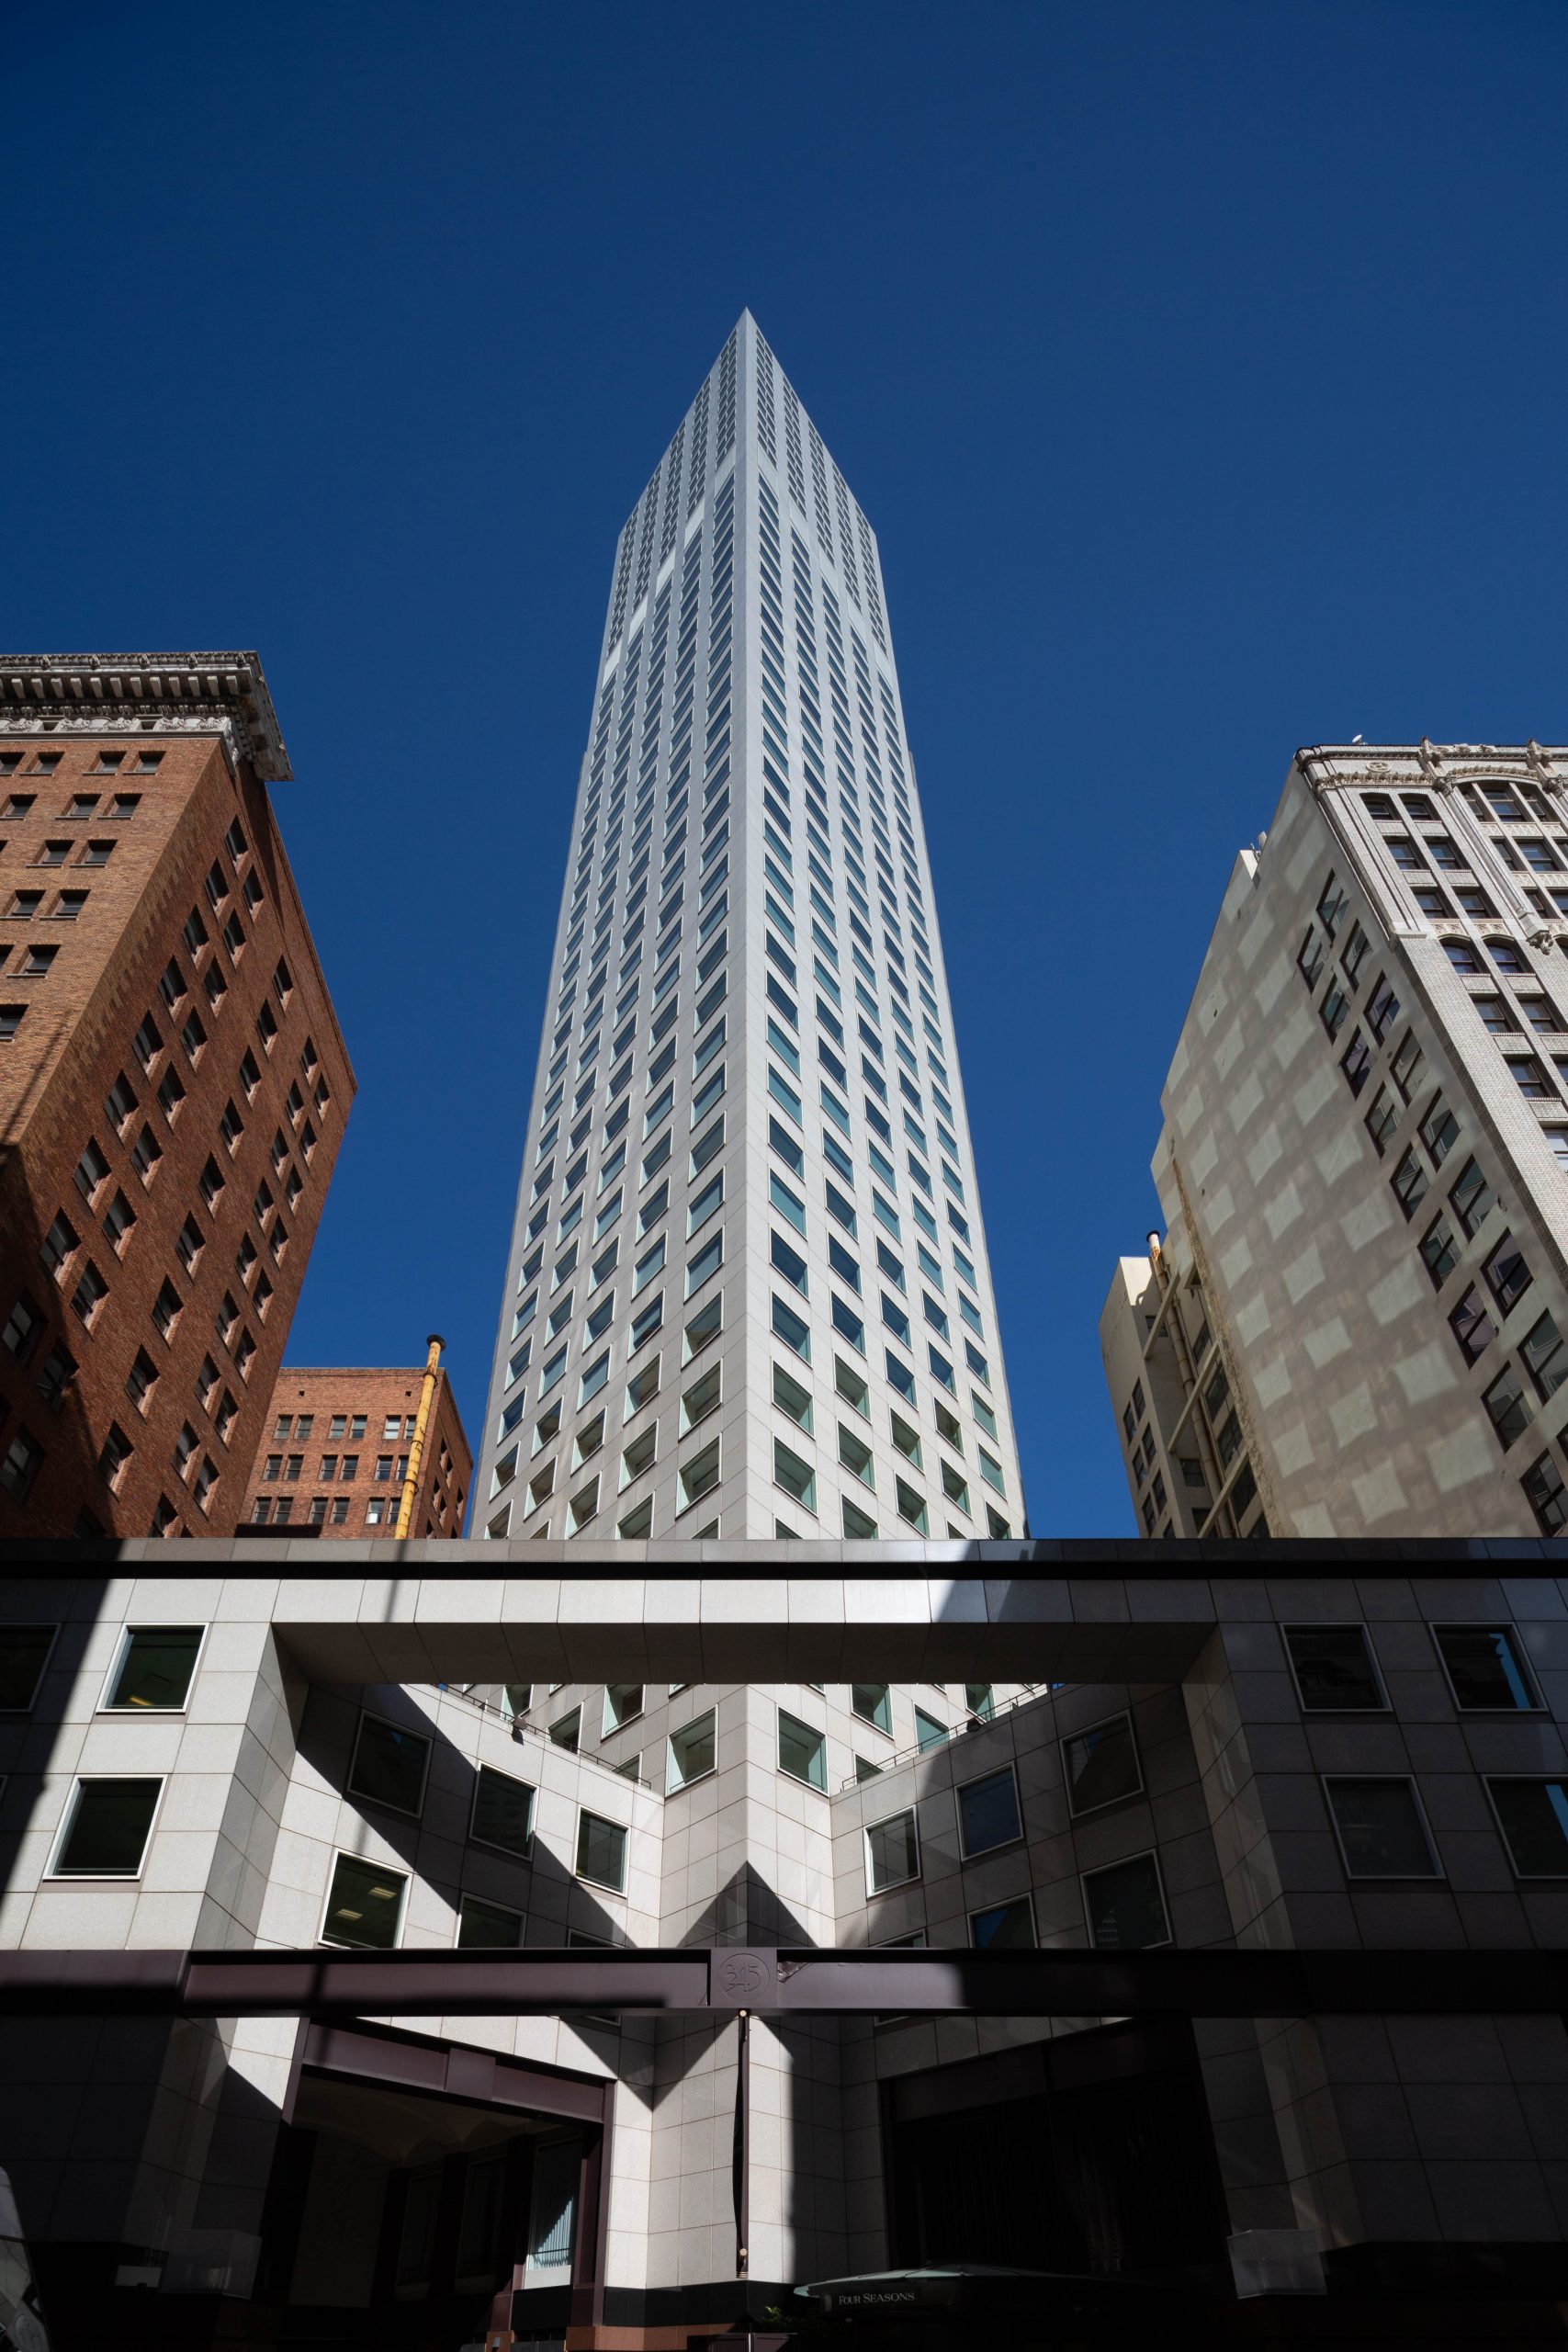 345 California Center from Sansome Street where the tower looks like 432 Park Avenue, image by Andrew Campbell Nelson